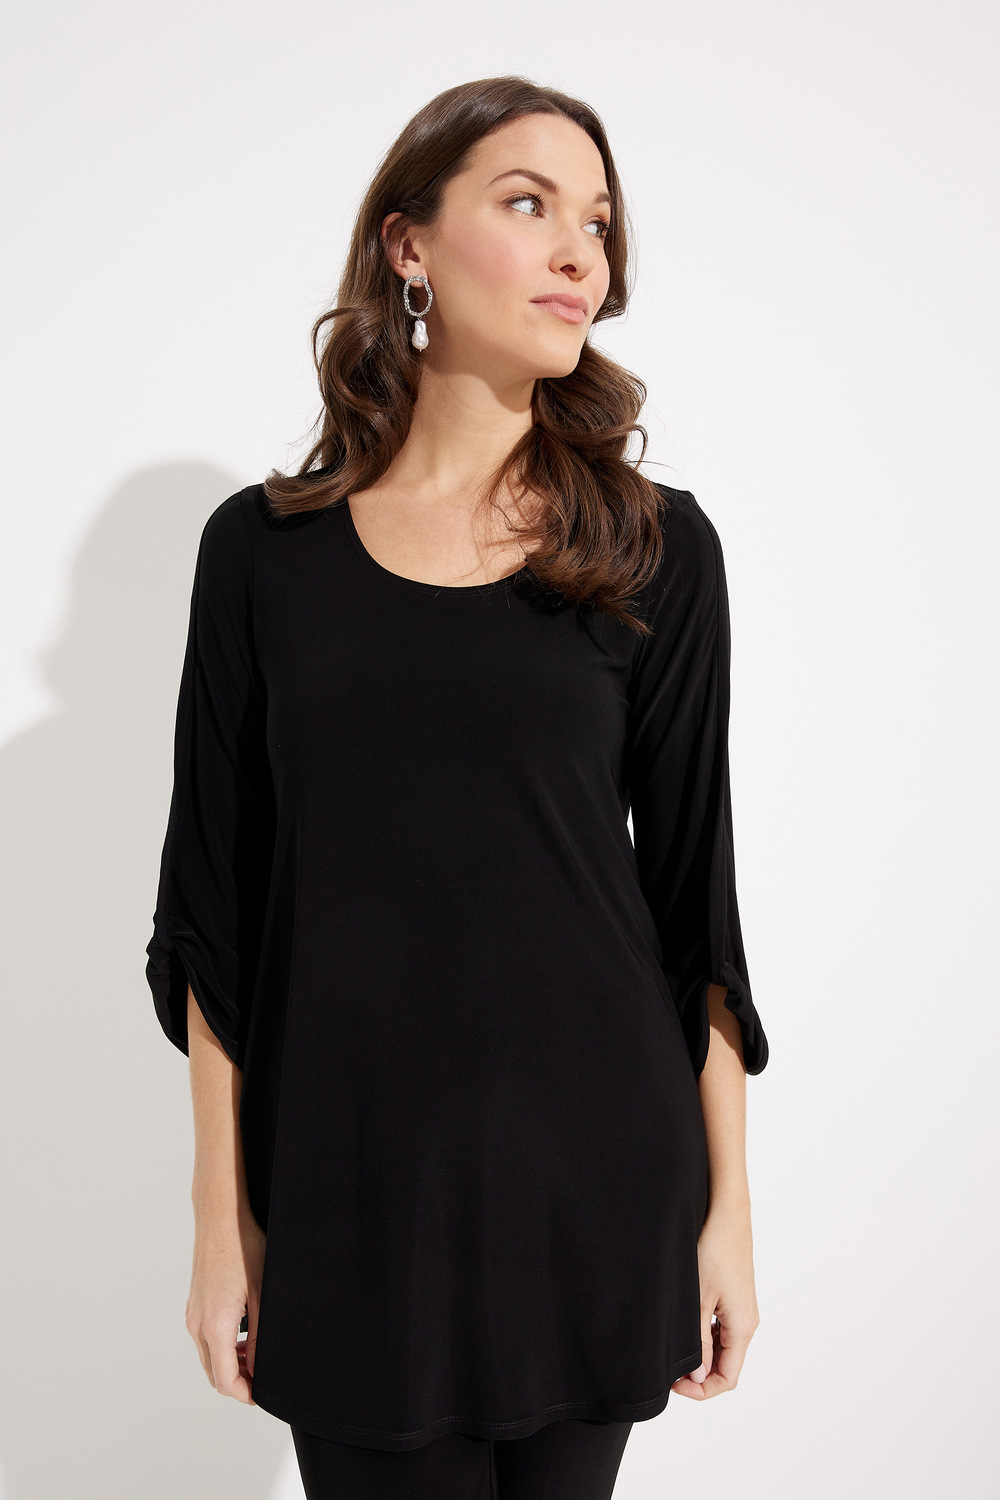 Pleated Front Top Style 231190. Black